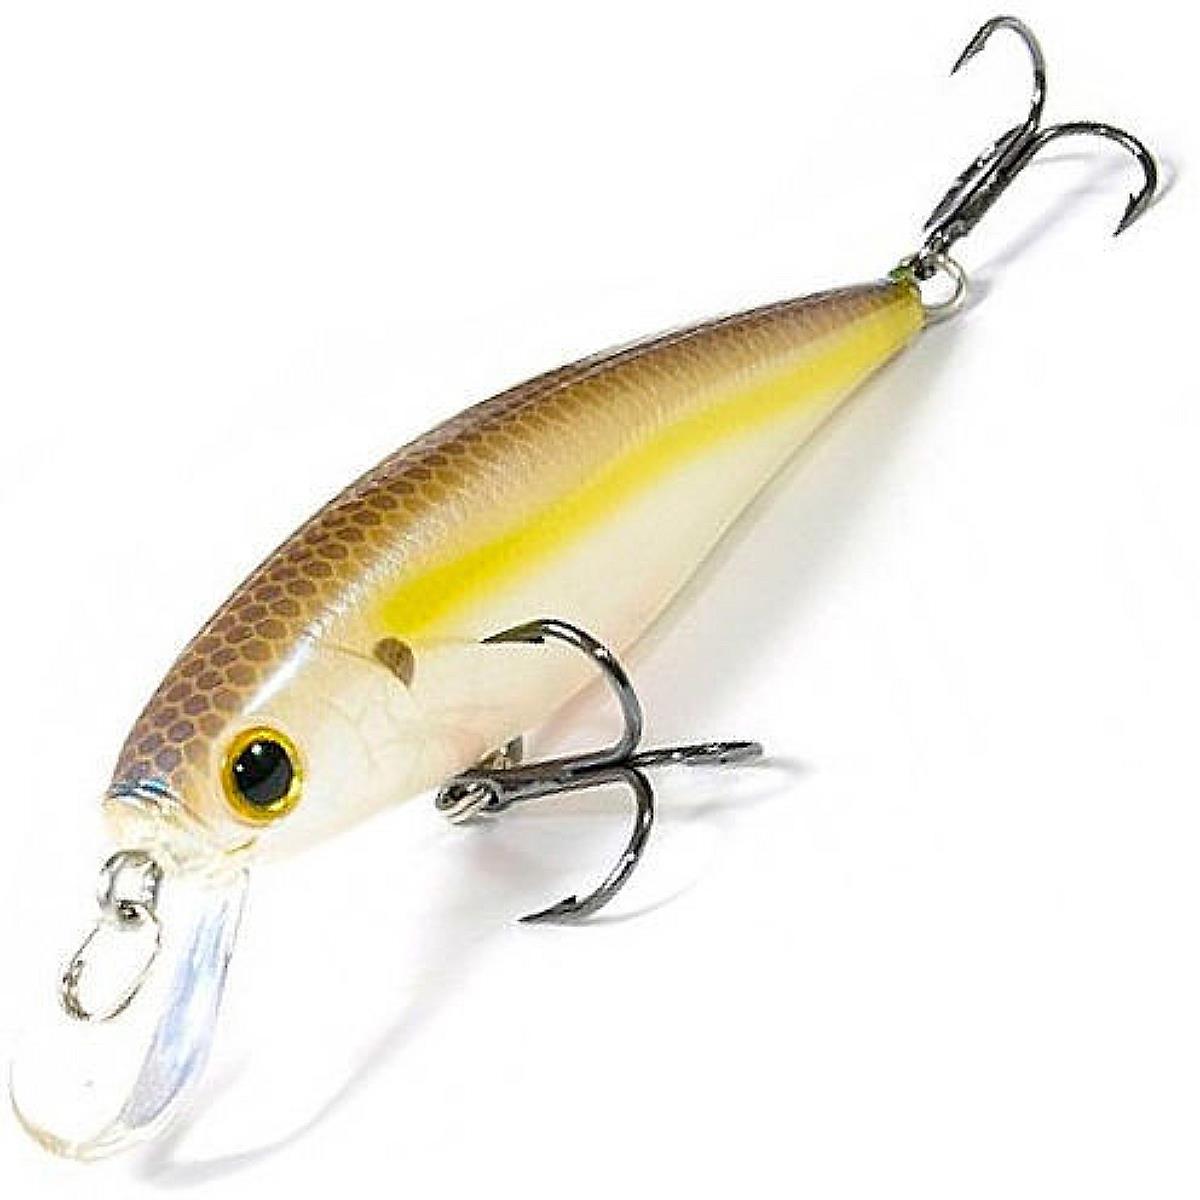 Воблер Pointer 78-250 Chartreuse Shad Lucky Craft воблер clutch sr 0002 misty shad lucky craft